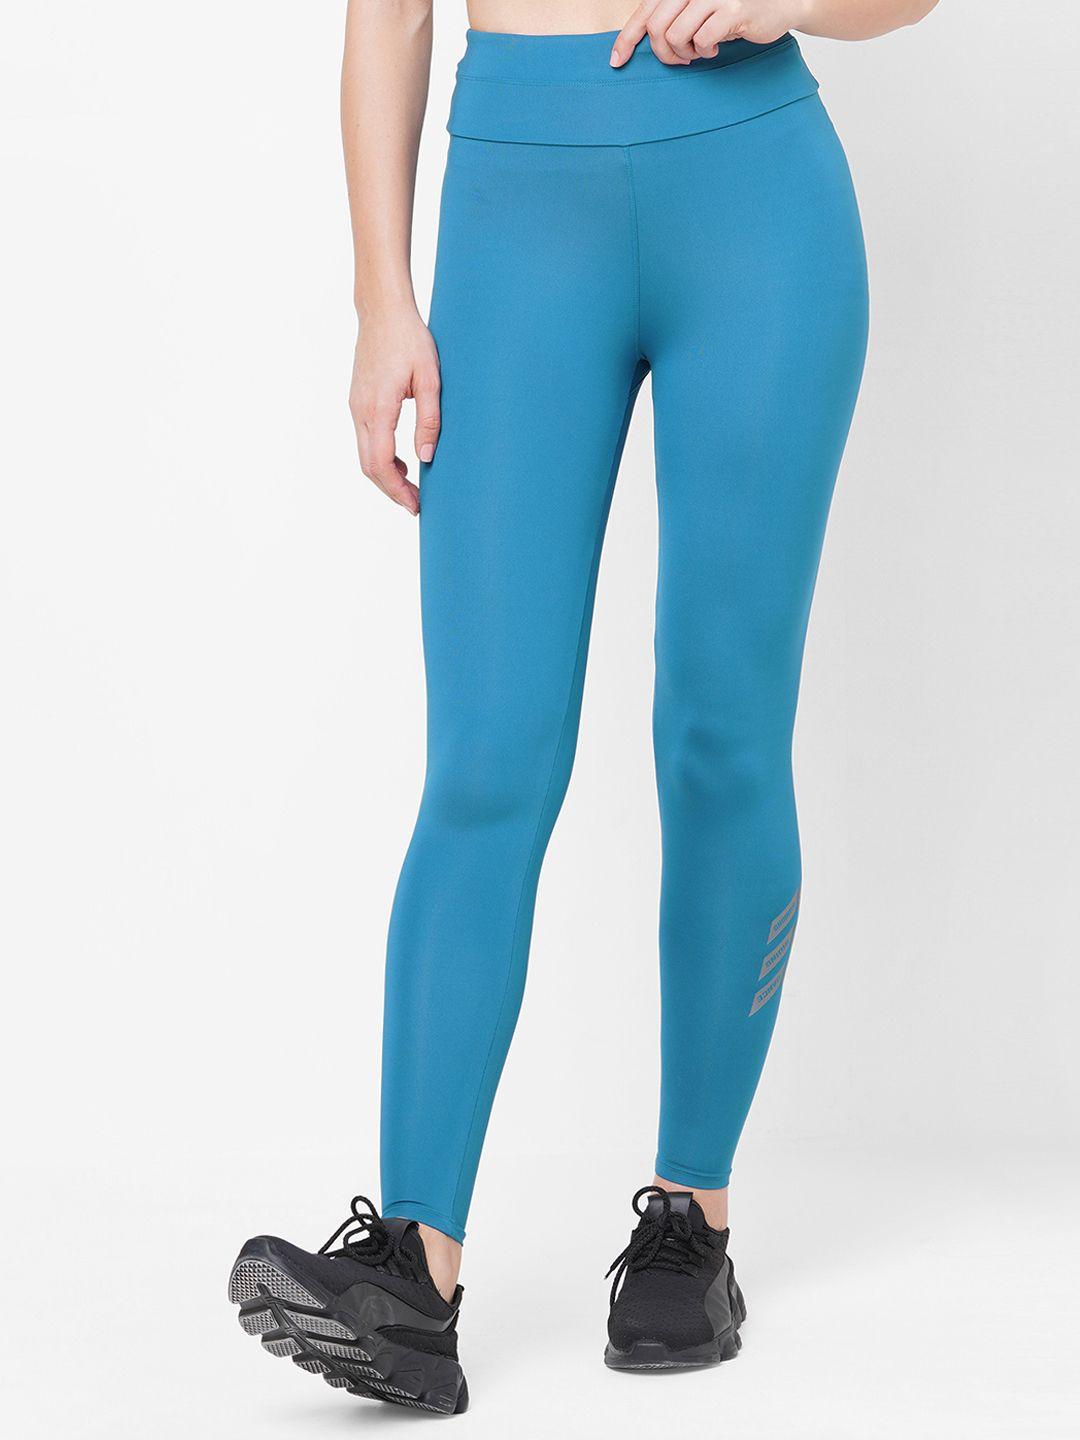 laasa sports women dry-fit high-rise tights